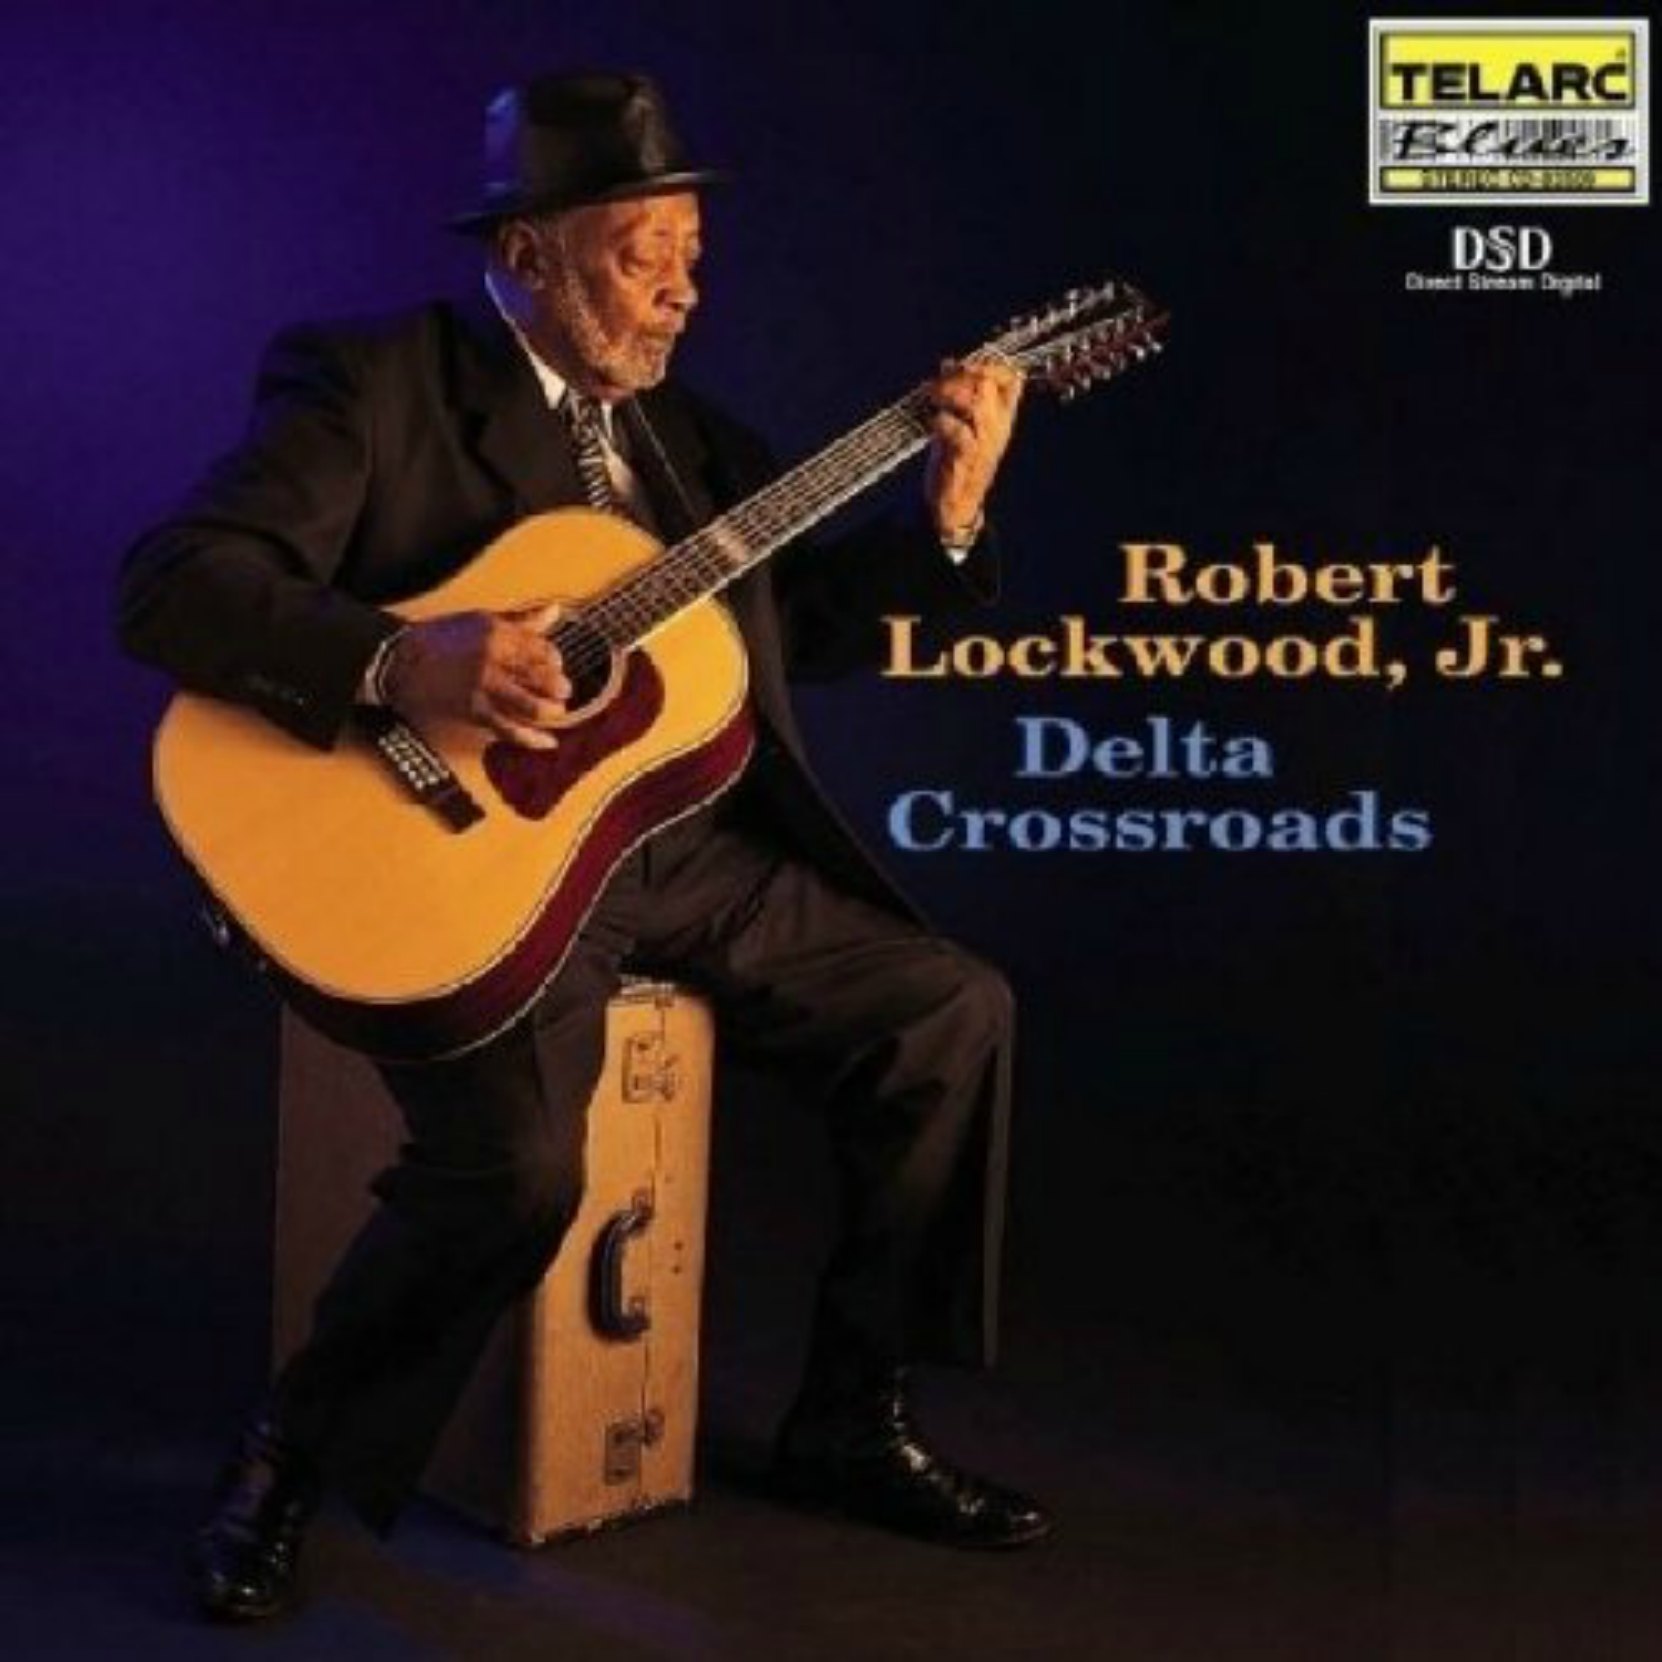 CD cover, Delta Crossroads, by Robert Lockwood Jr., released on Telarc Records